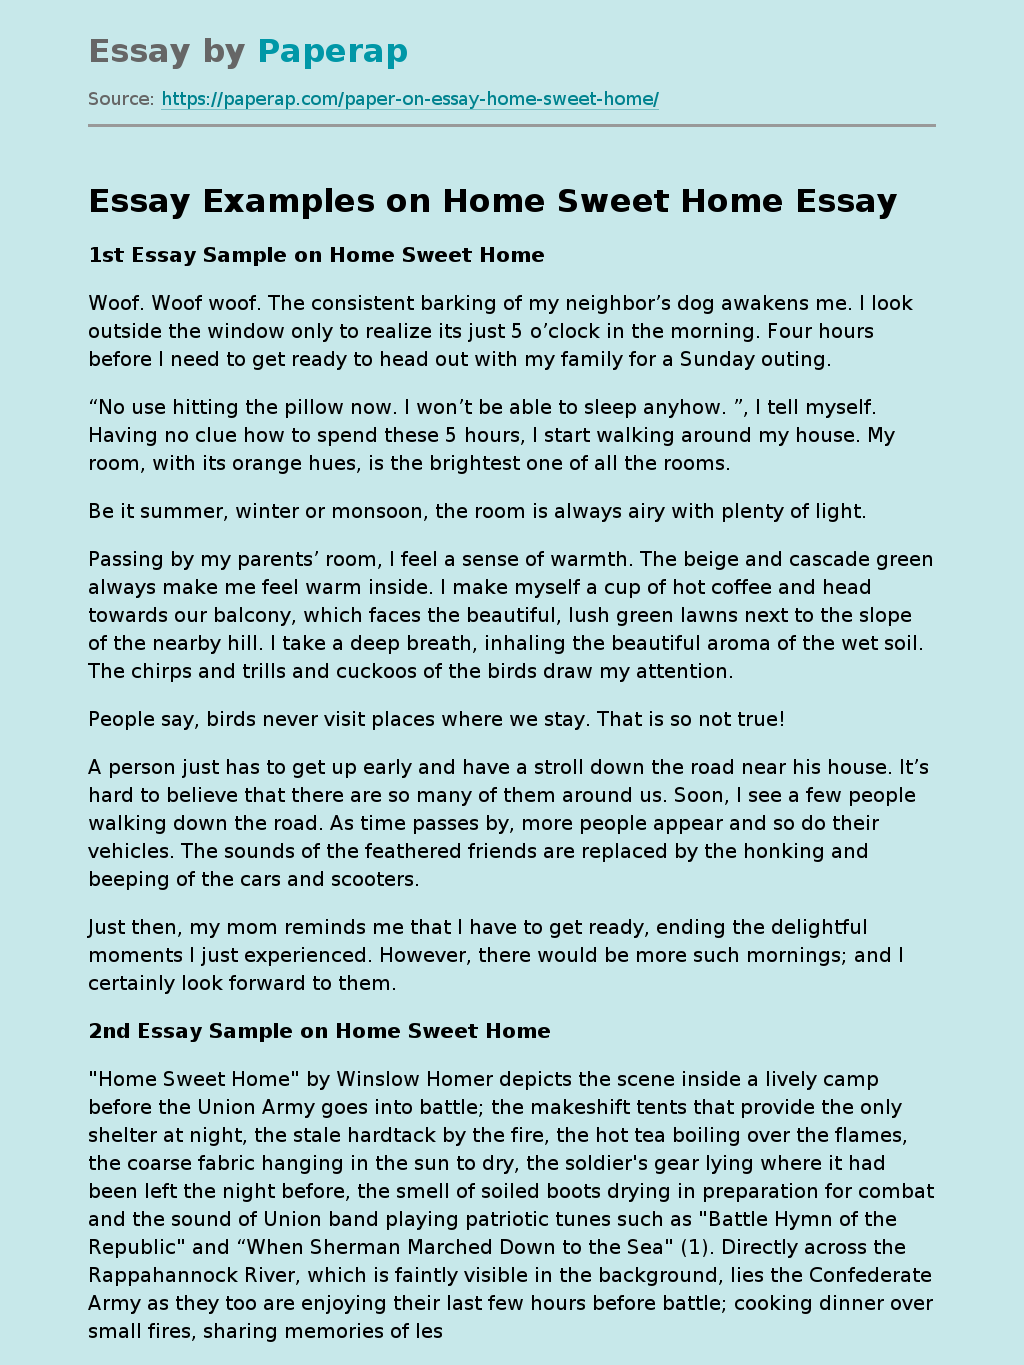 Essay Examples on Home Sweet Home